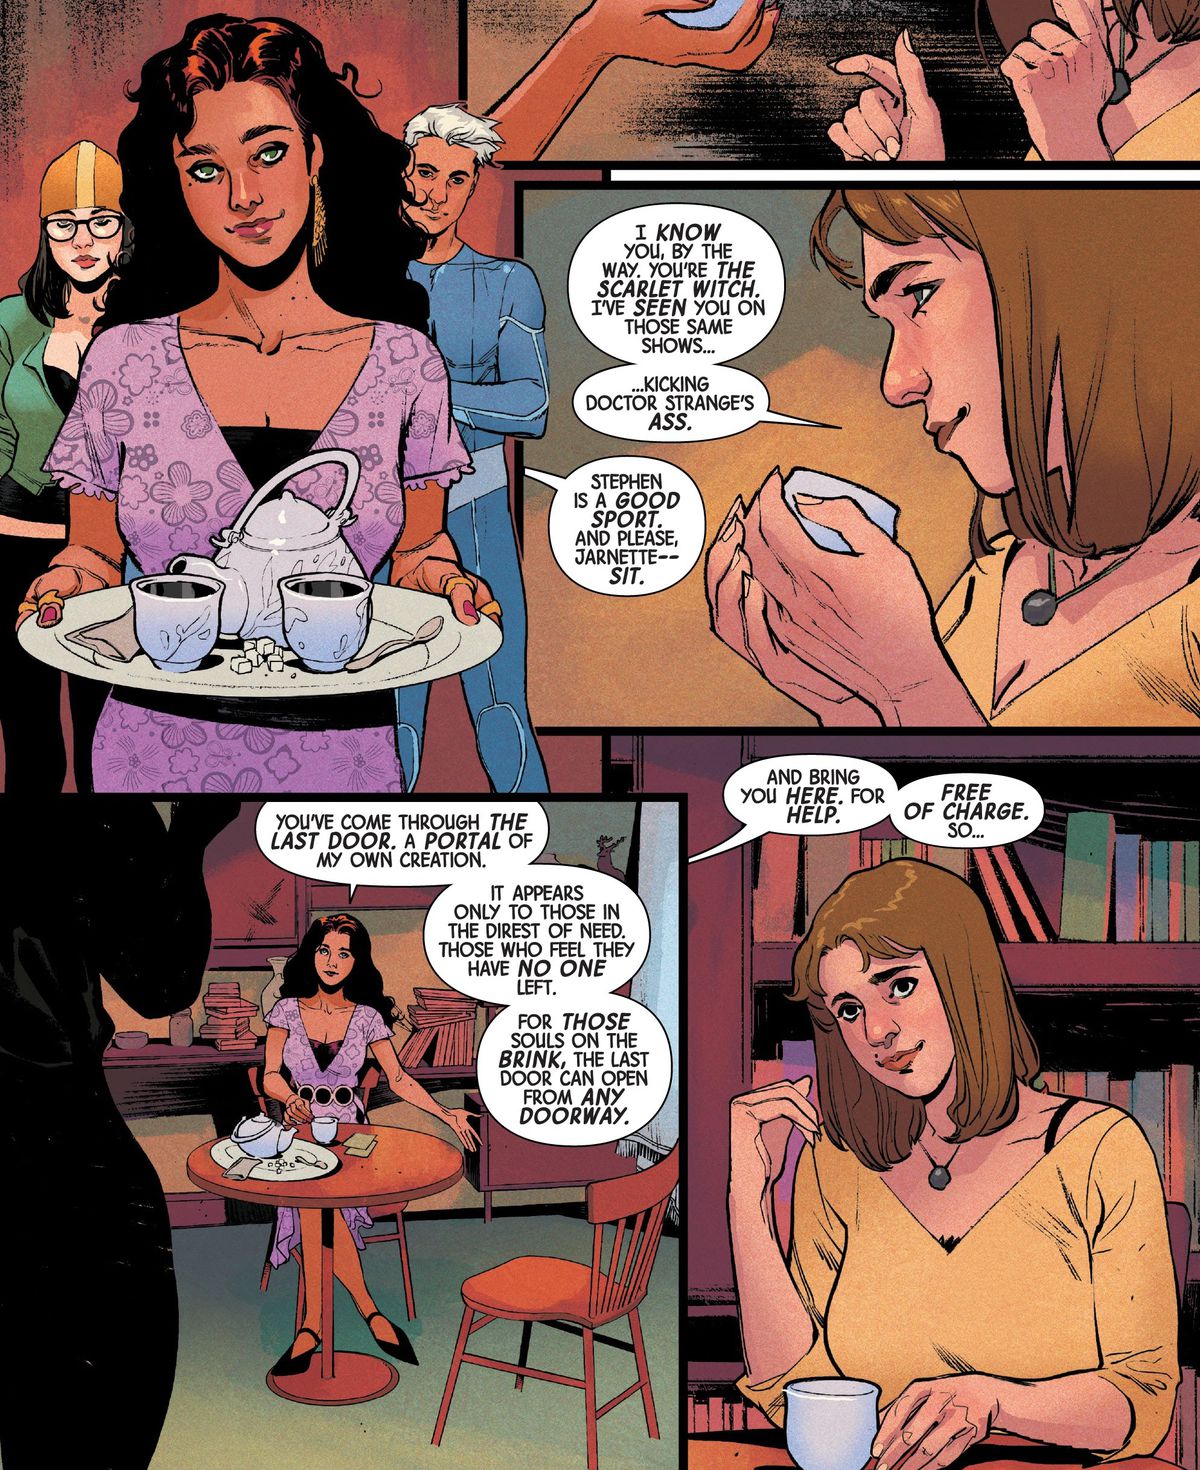 “You’ve come through the Last Door. A portal of my own creation,” the Scarlet Witch explains as she serves her guest tea. “It appears only to those in the direst of need. Those who feel they have no one left,” in Scarlet Witch #1. 